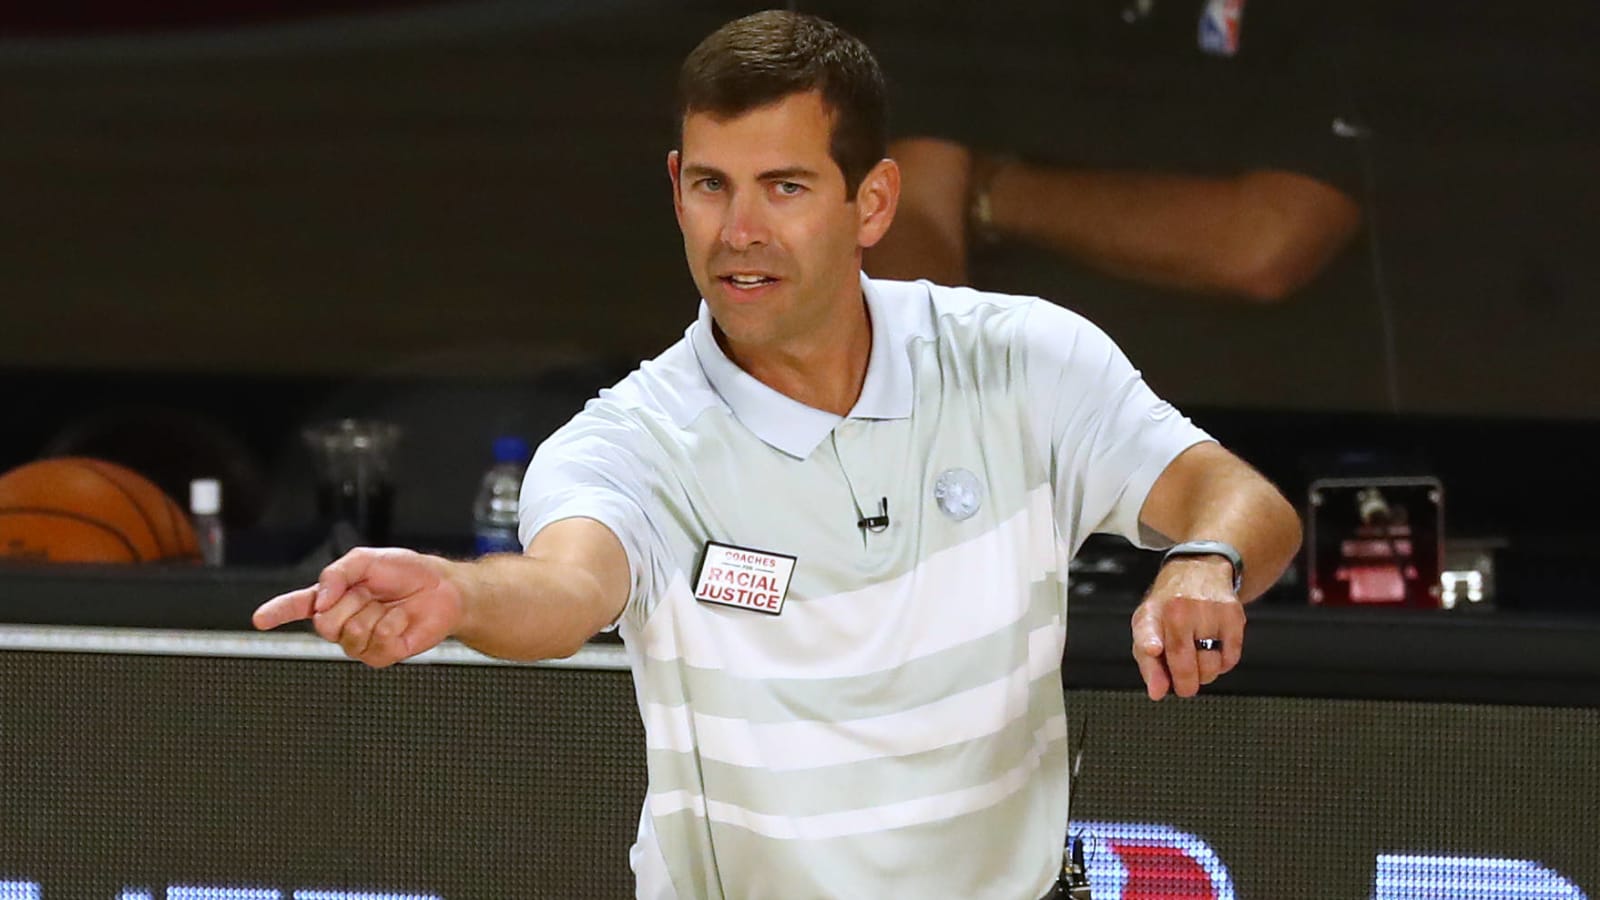 Brad Stevens has high praise for Heat ahead of Eastern Conference Finals